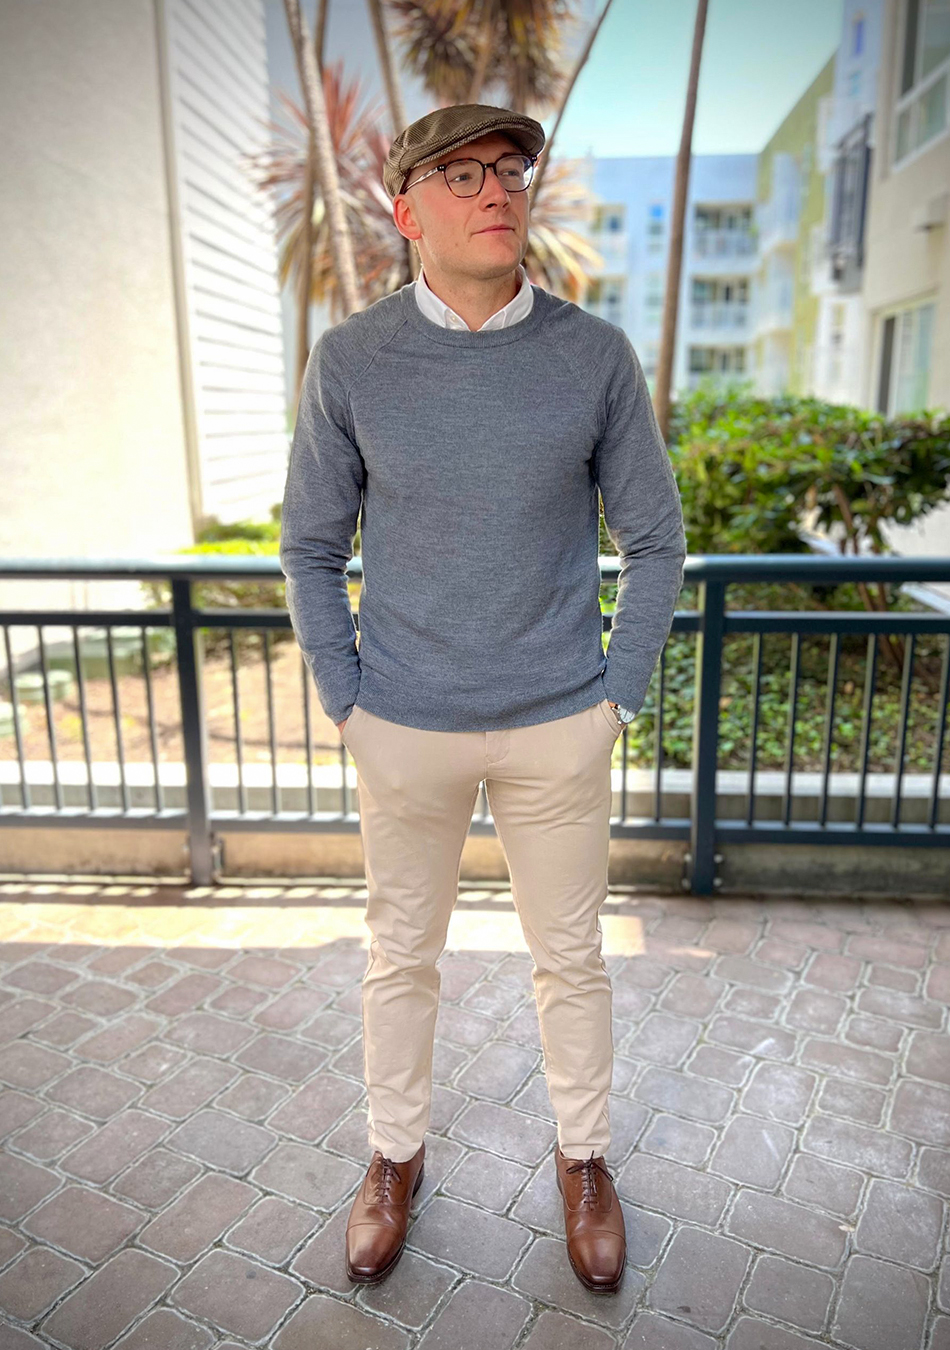 Grey sweater, tan pants, white OCBD, and brown oxford shoes